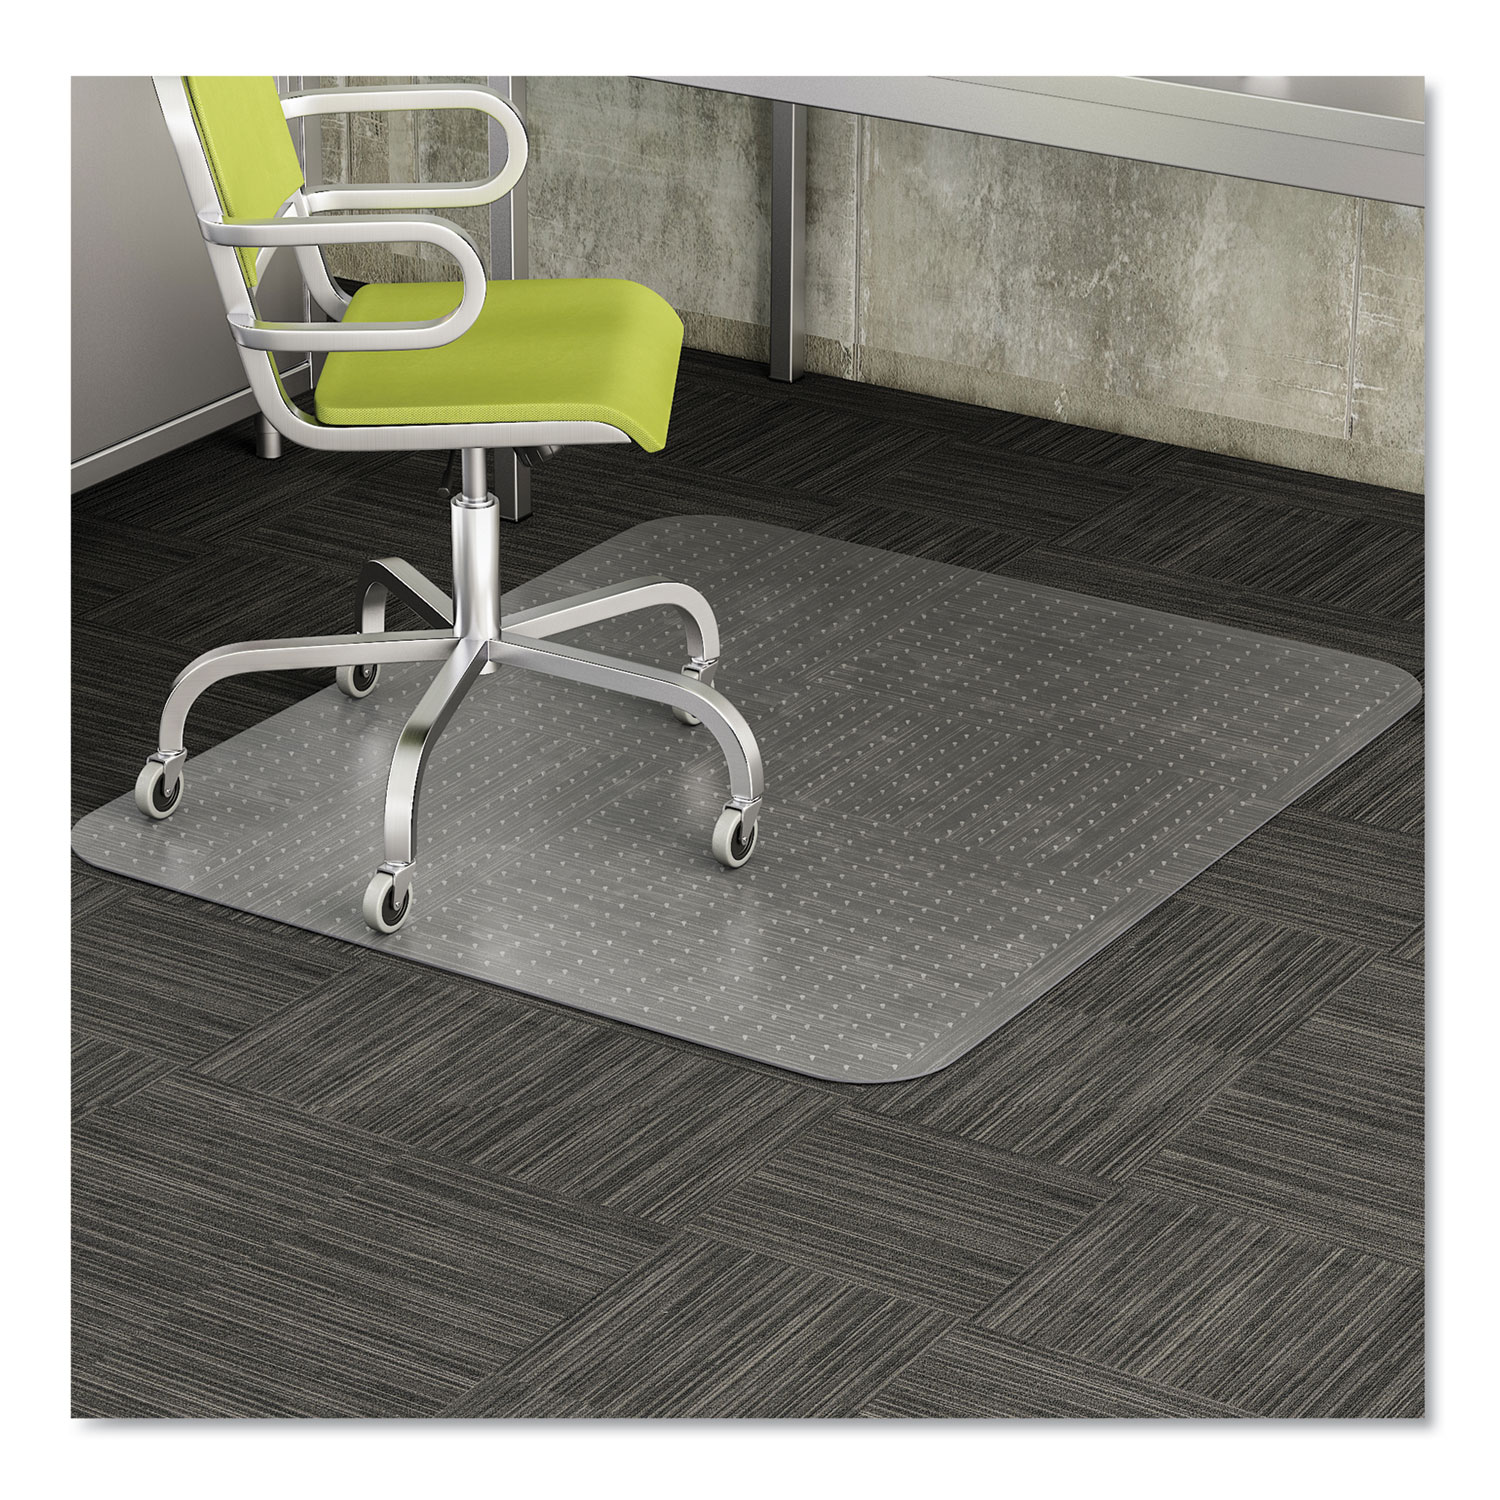 EconoMat Occasional Use Chair Mat for Low Pile Carpet, 45 x 53, Rectangular, CR